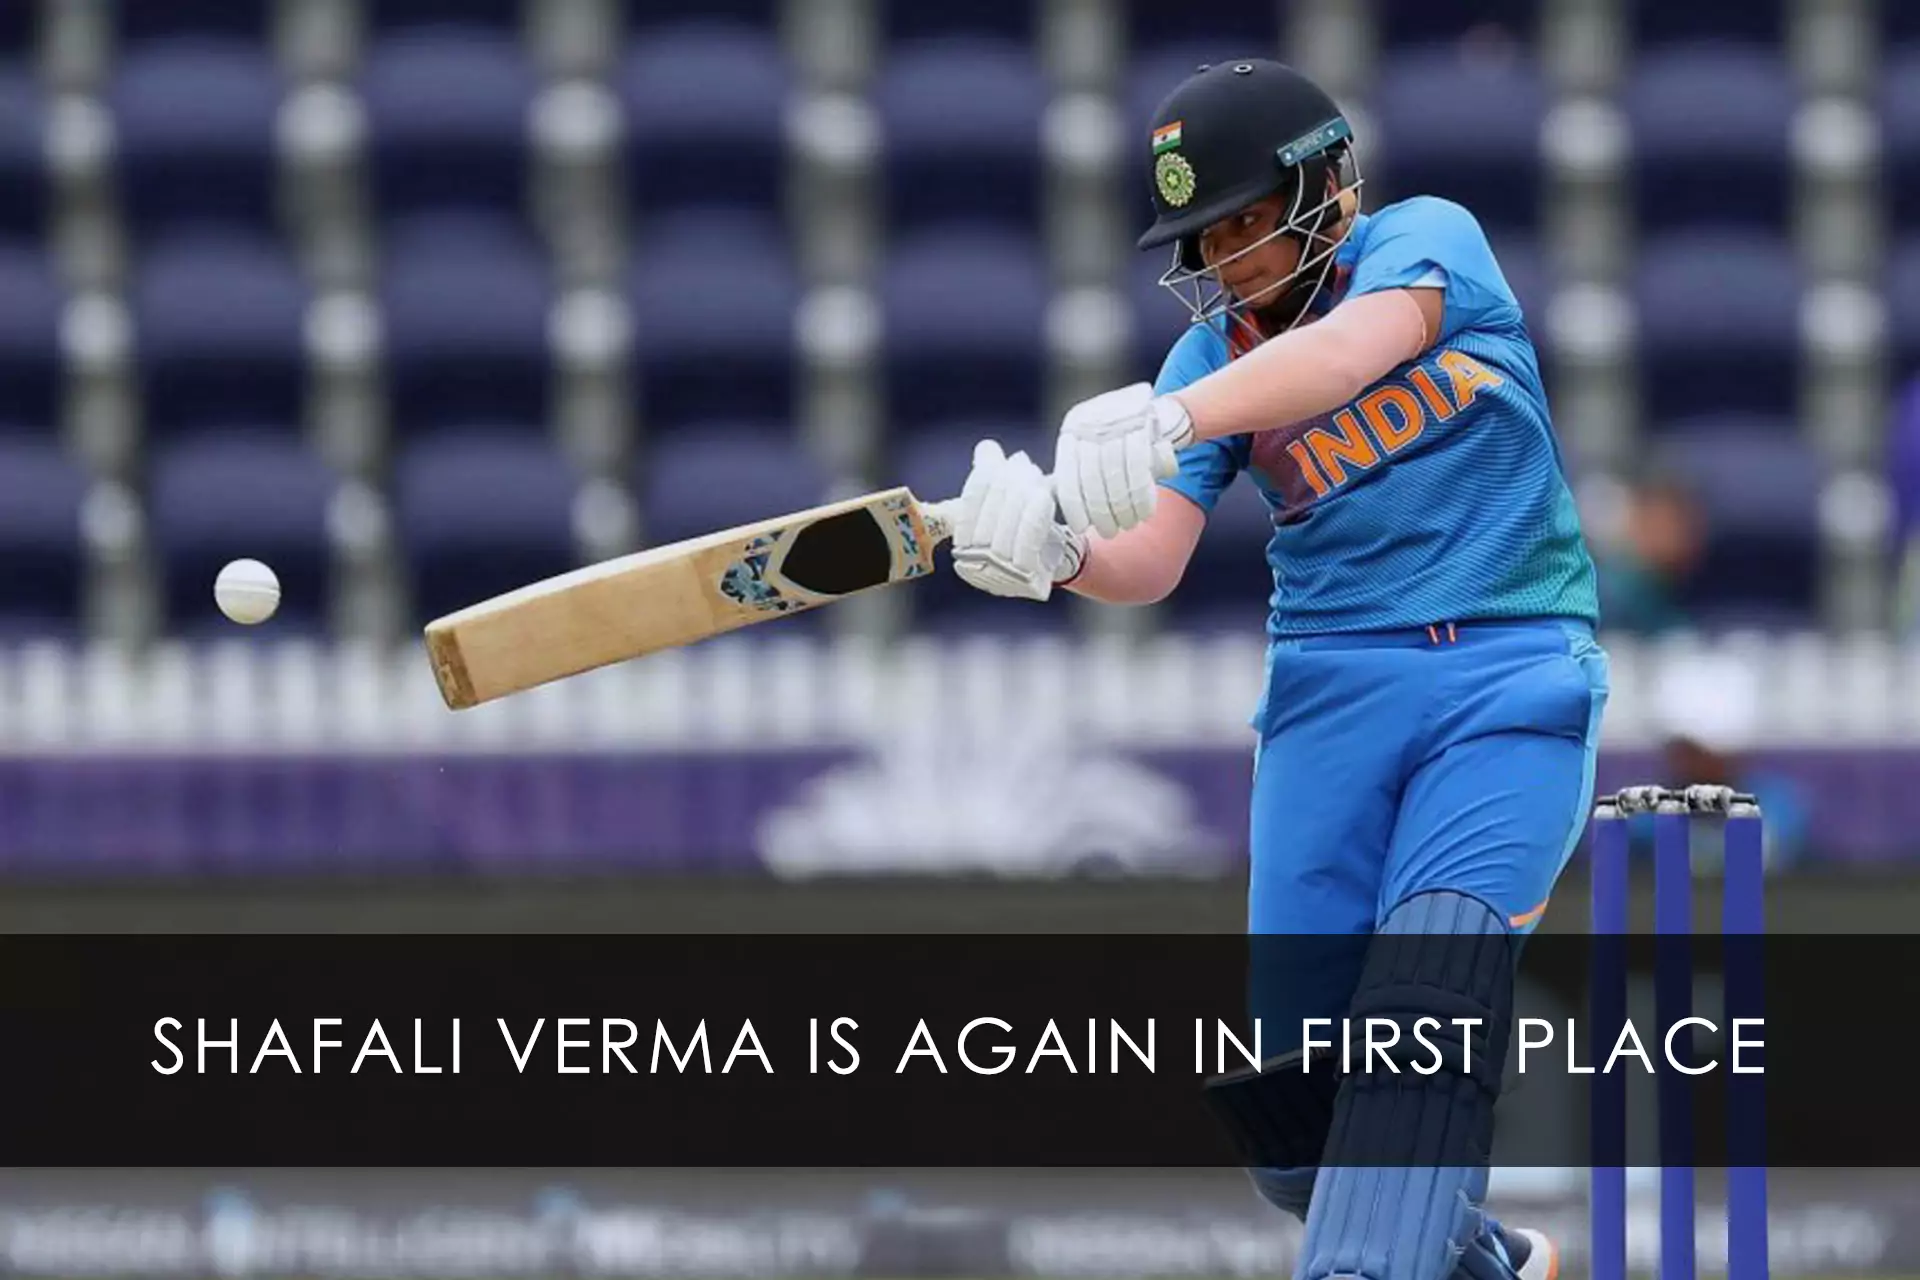 Shafali Verma continues to be in the first place of the ratings of ICE Women Twenty20 International after its update.